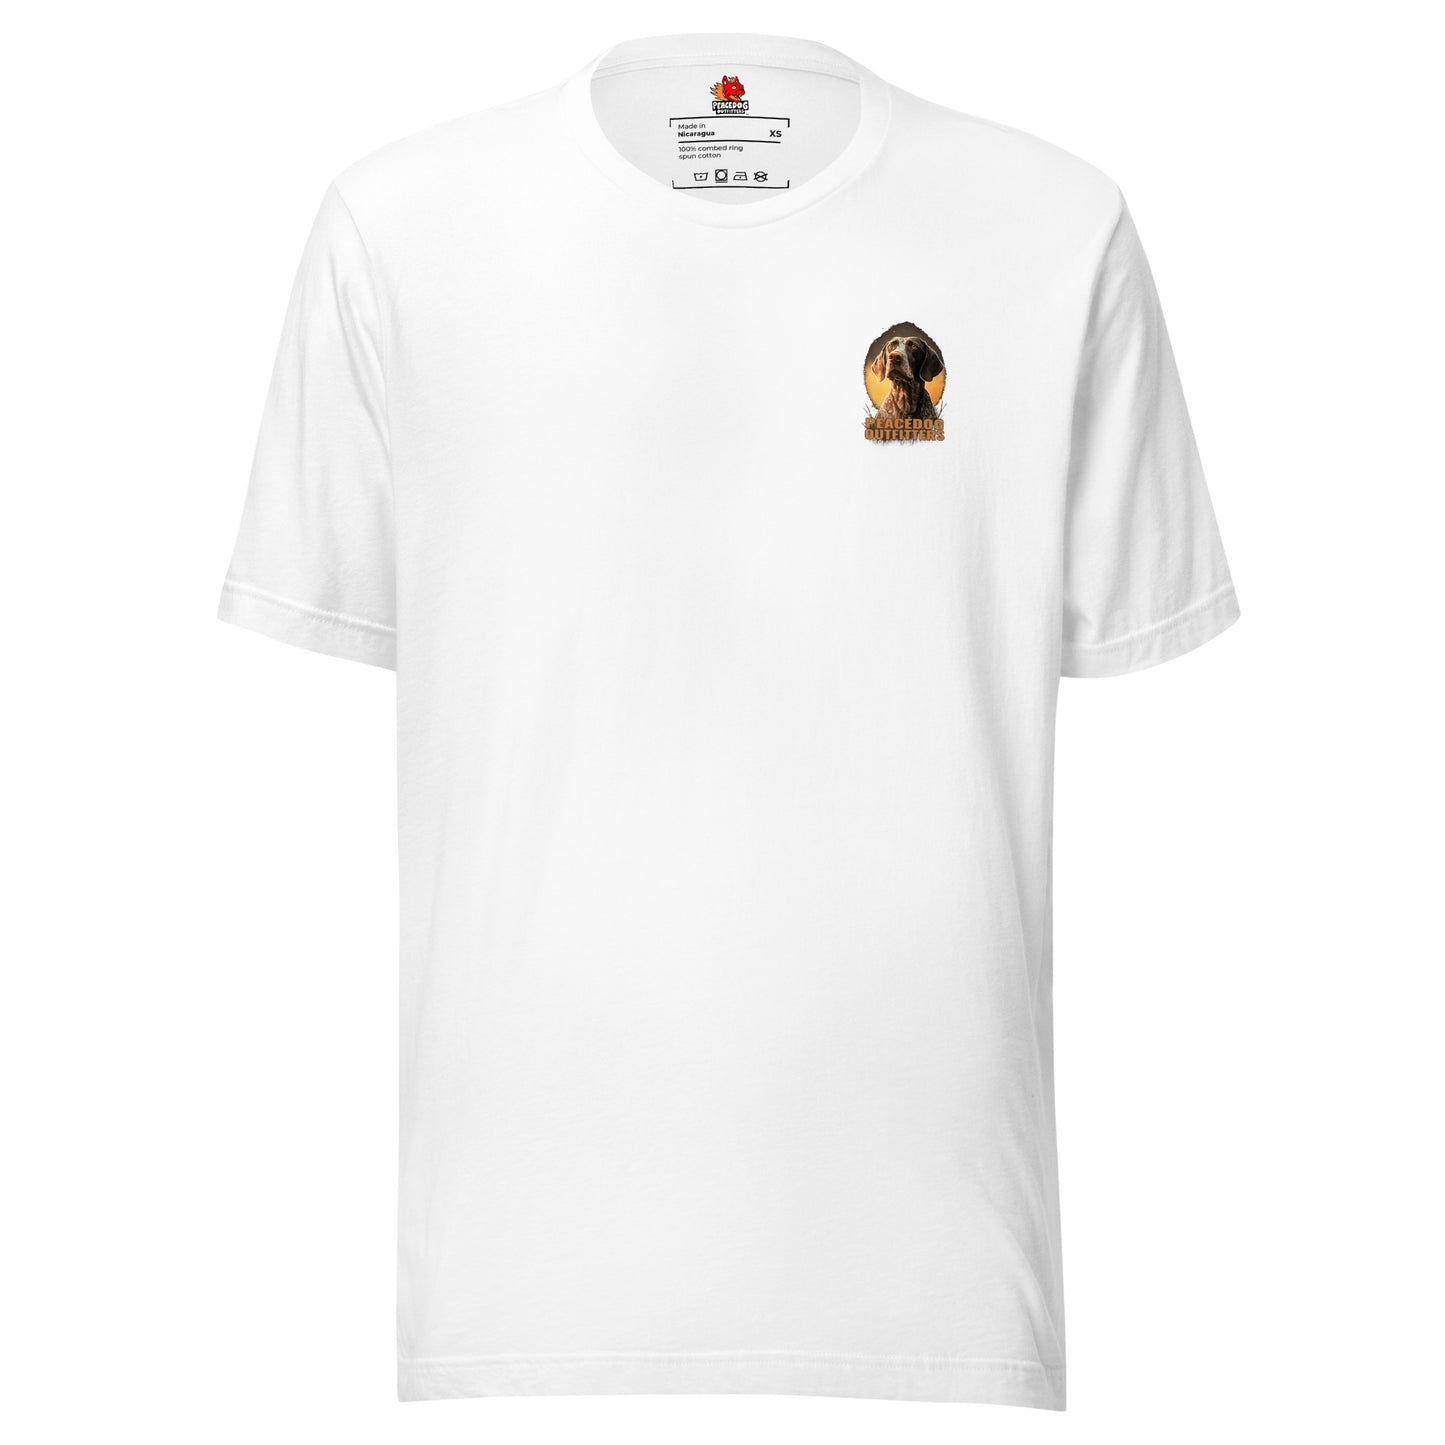 German Shorthaired Pointer T-shirt